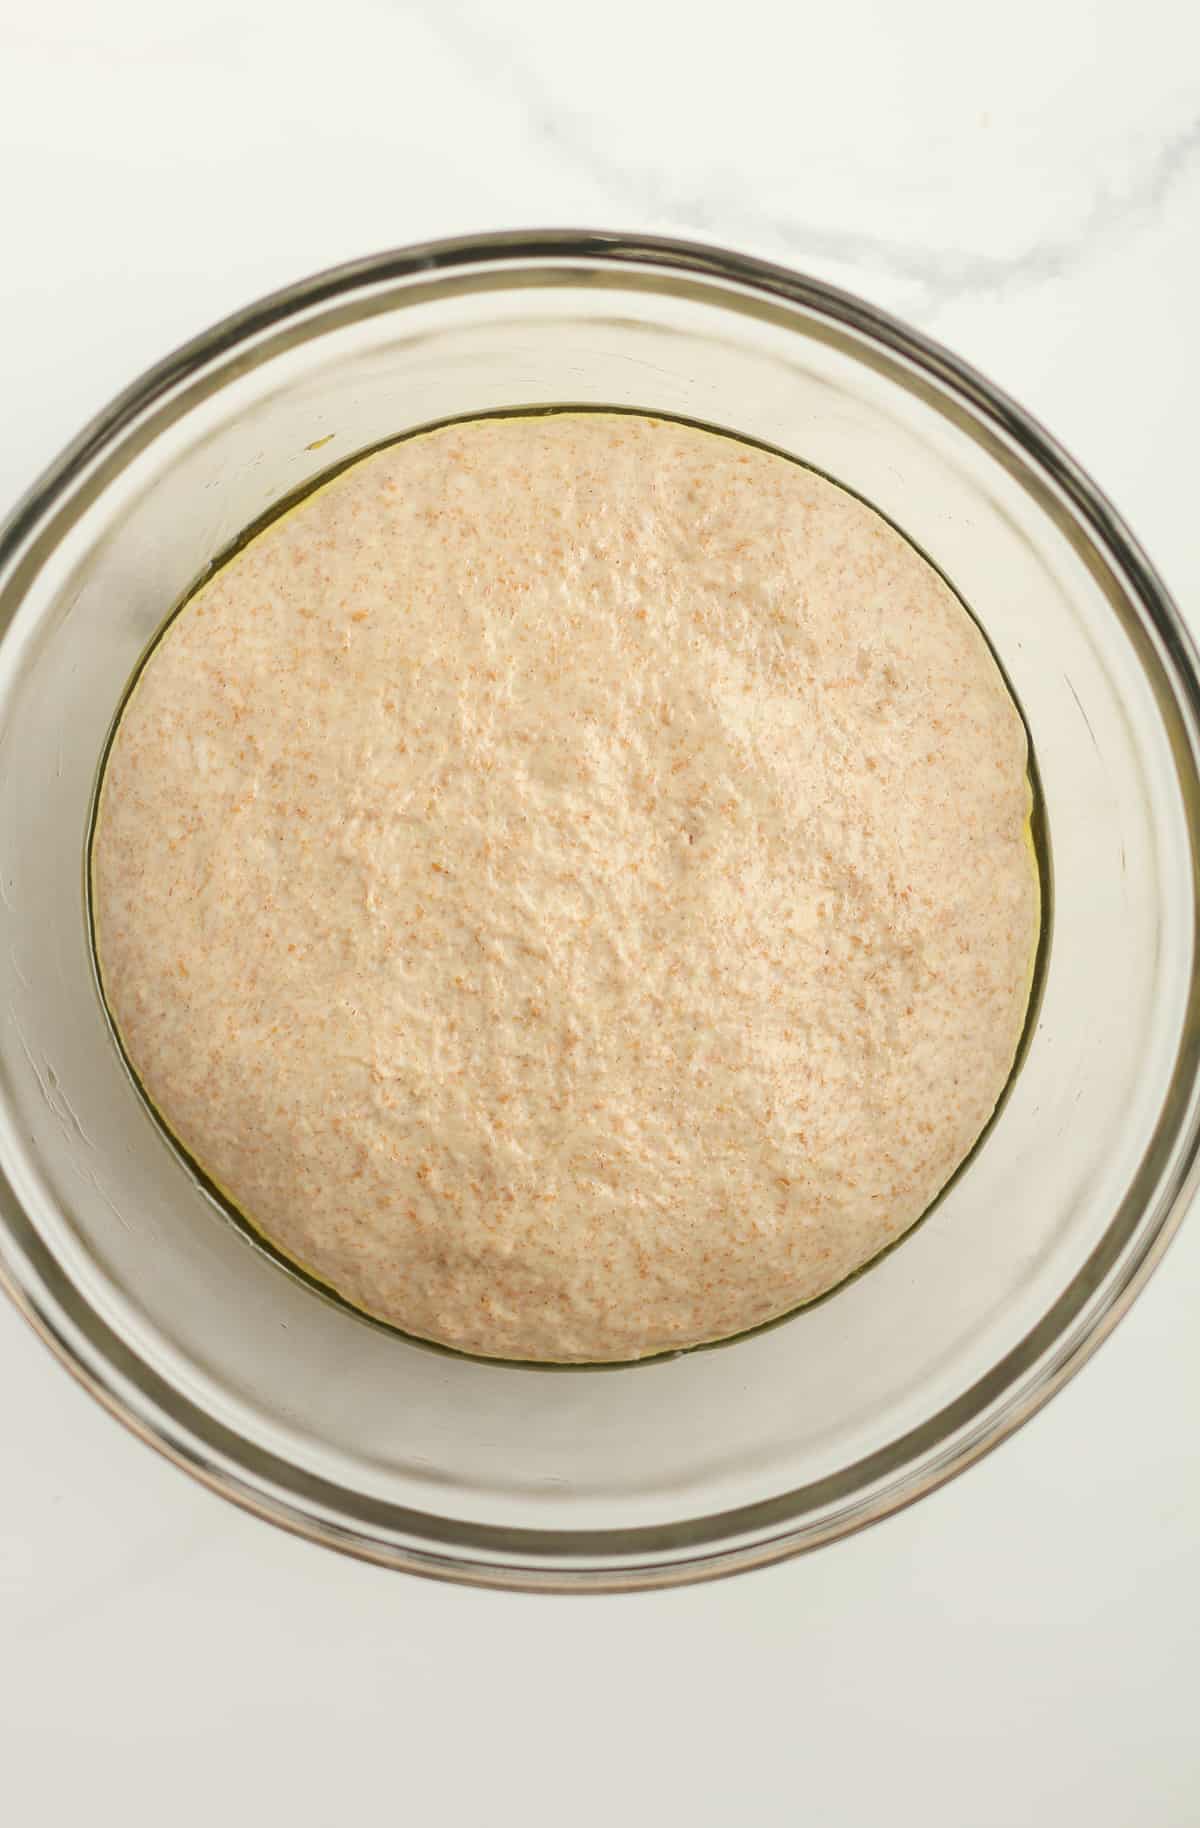 Whole wheat pizza dough before rising.